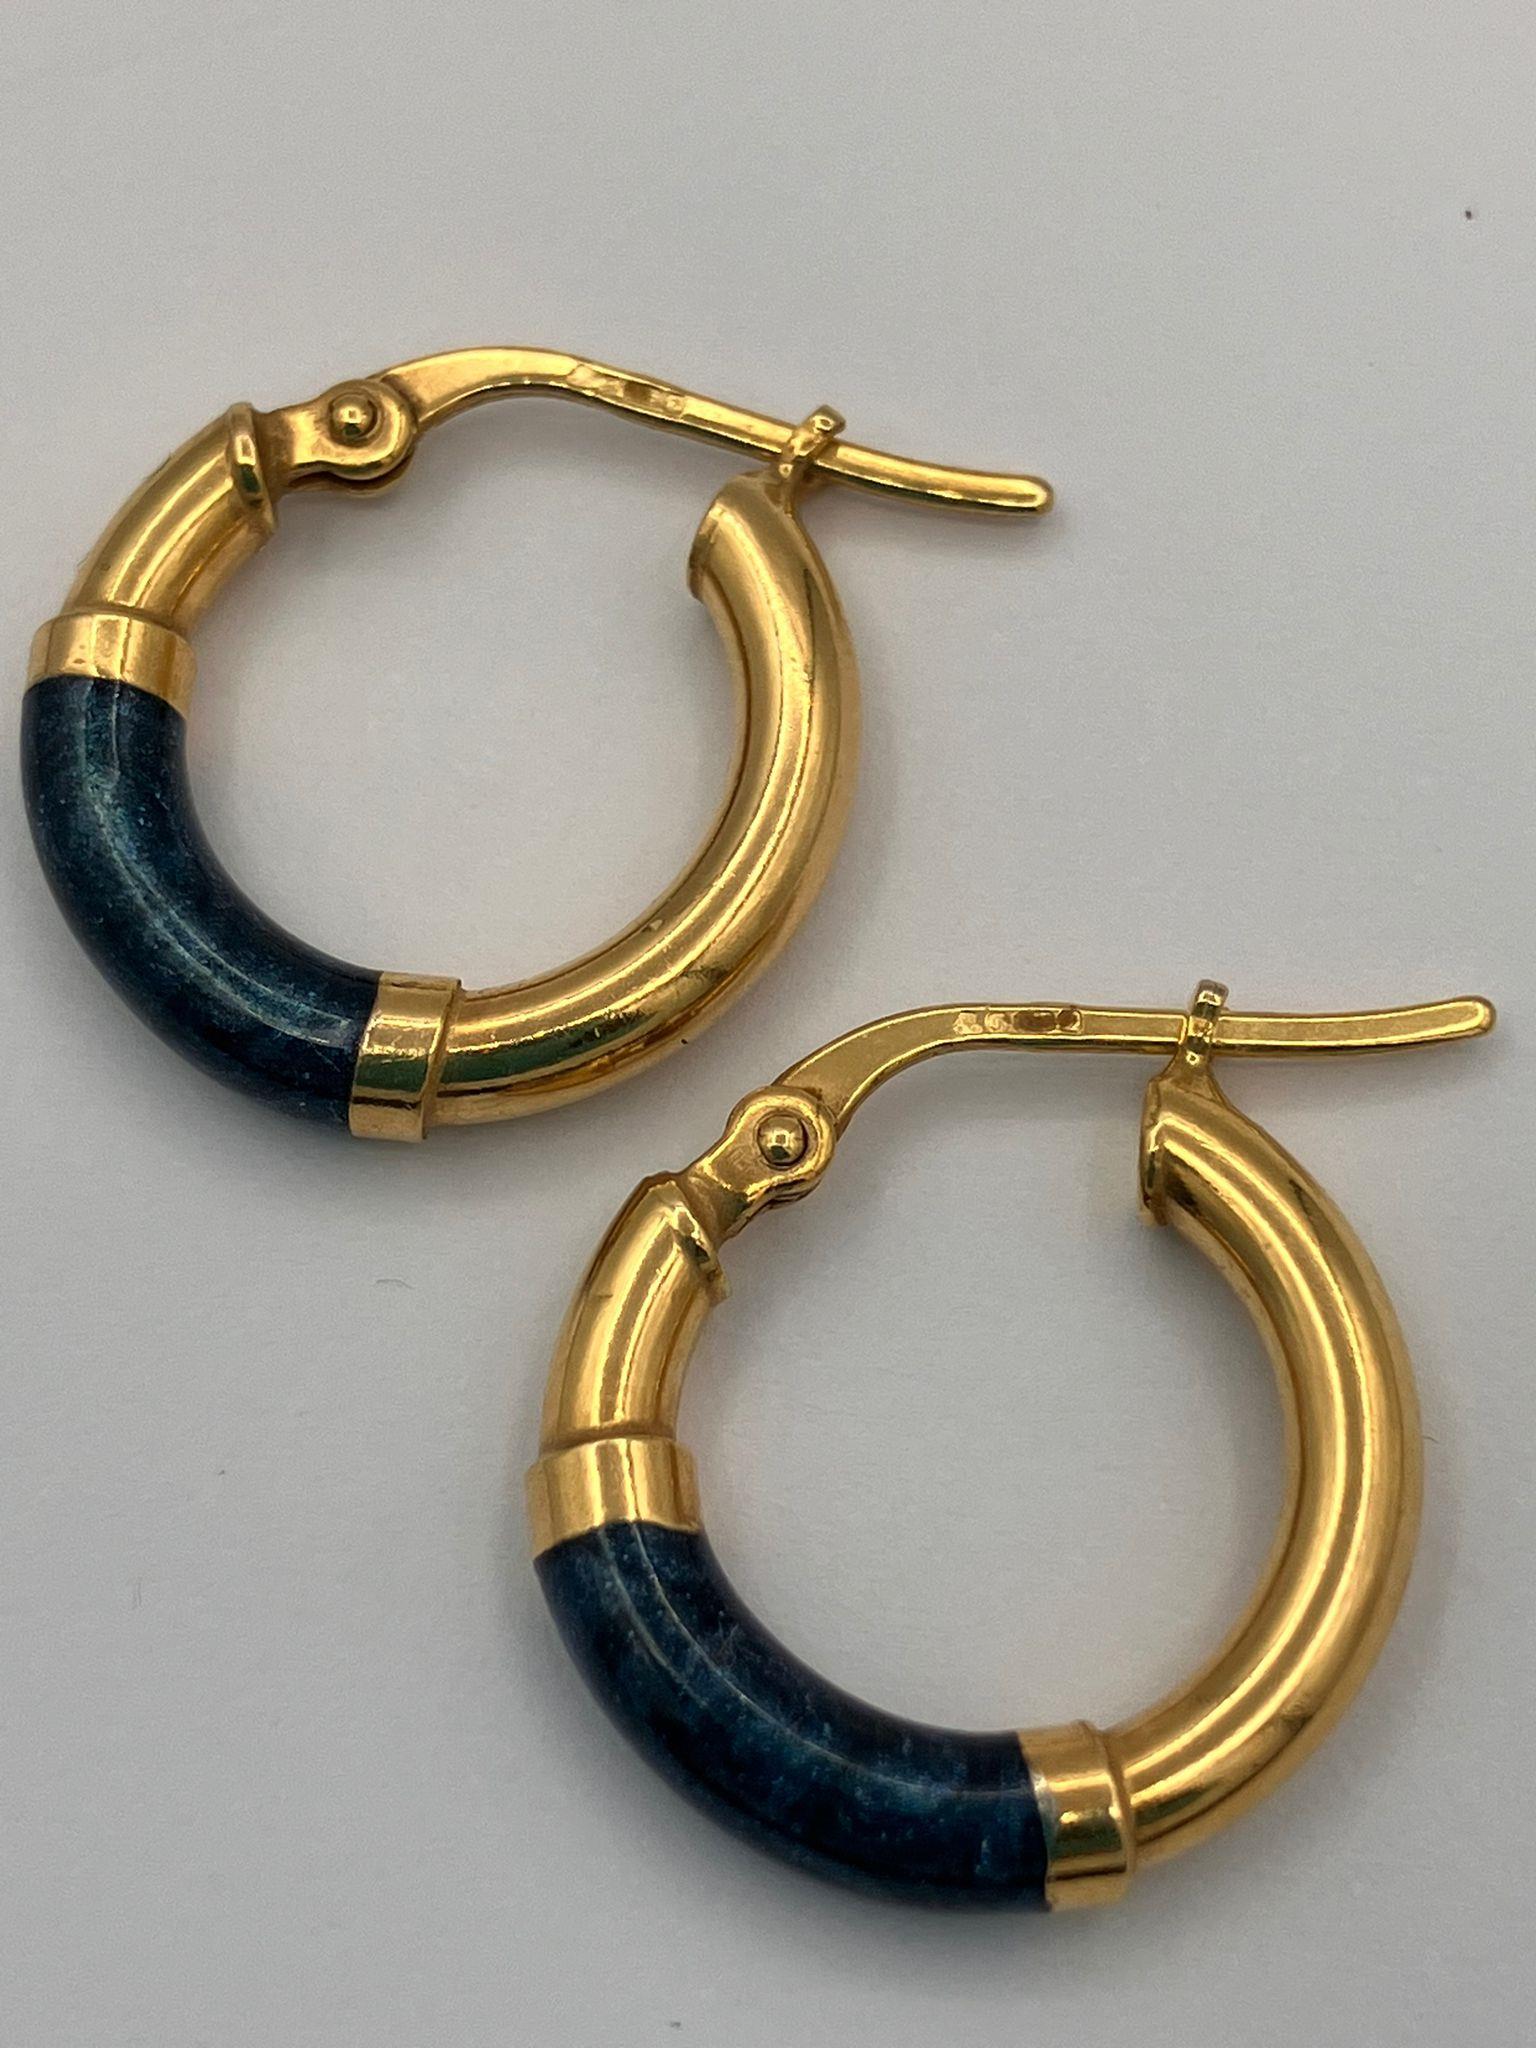 Beautiful pair of 9 carat GOLD and BLUE LAB OPAL HOOP EARRINGS.Fully hallmarked. 2.2 grams. 1.7 cm